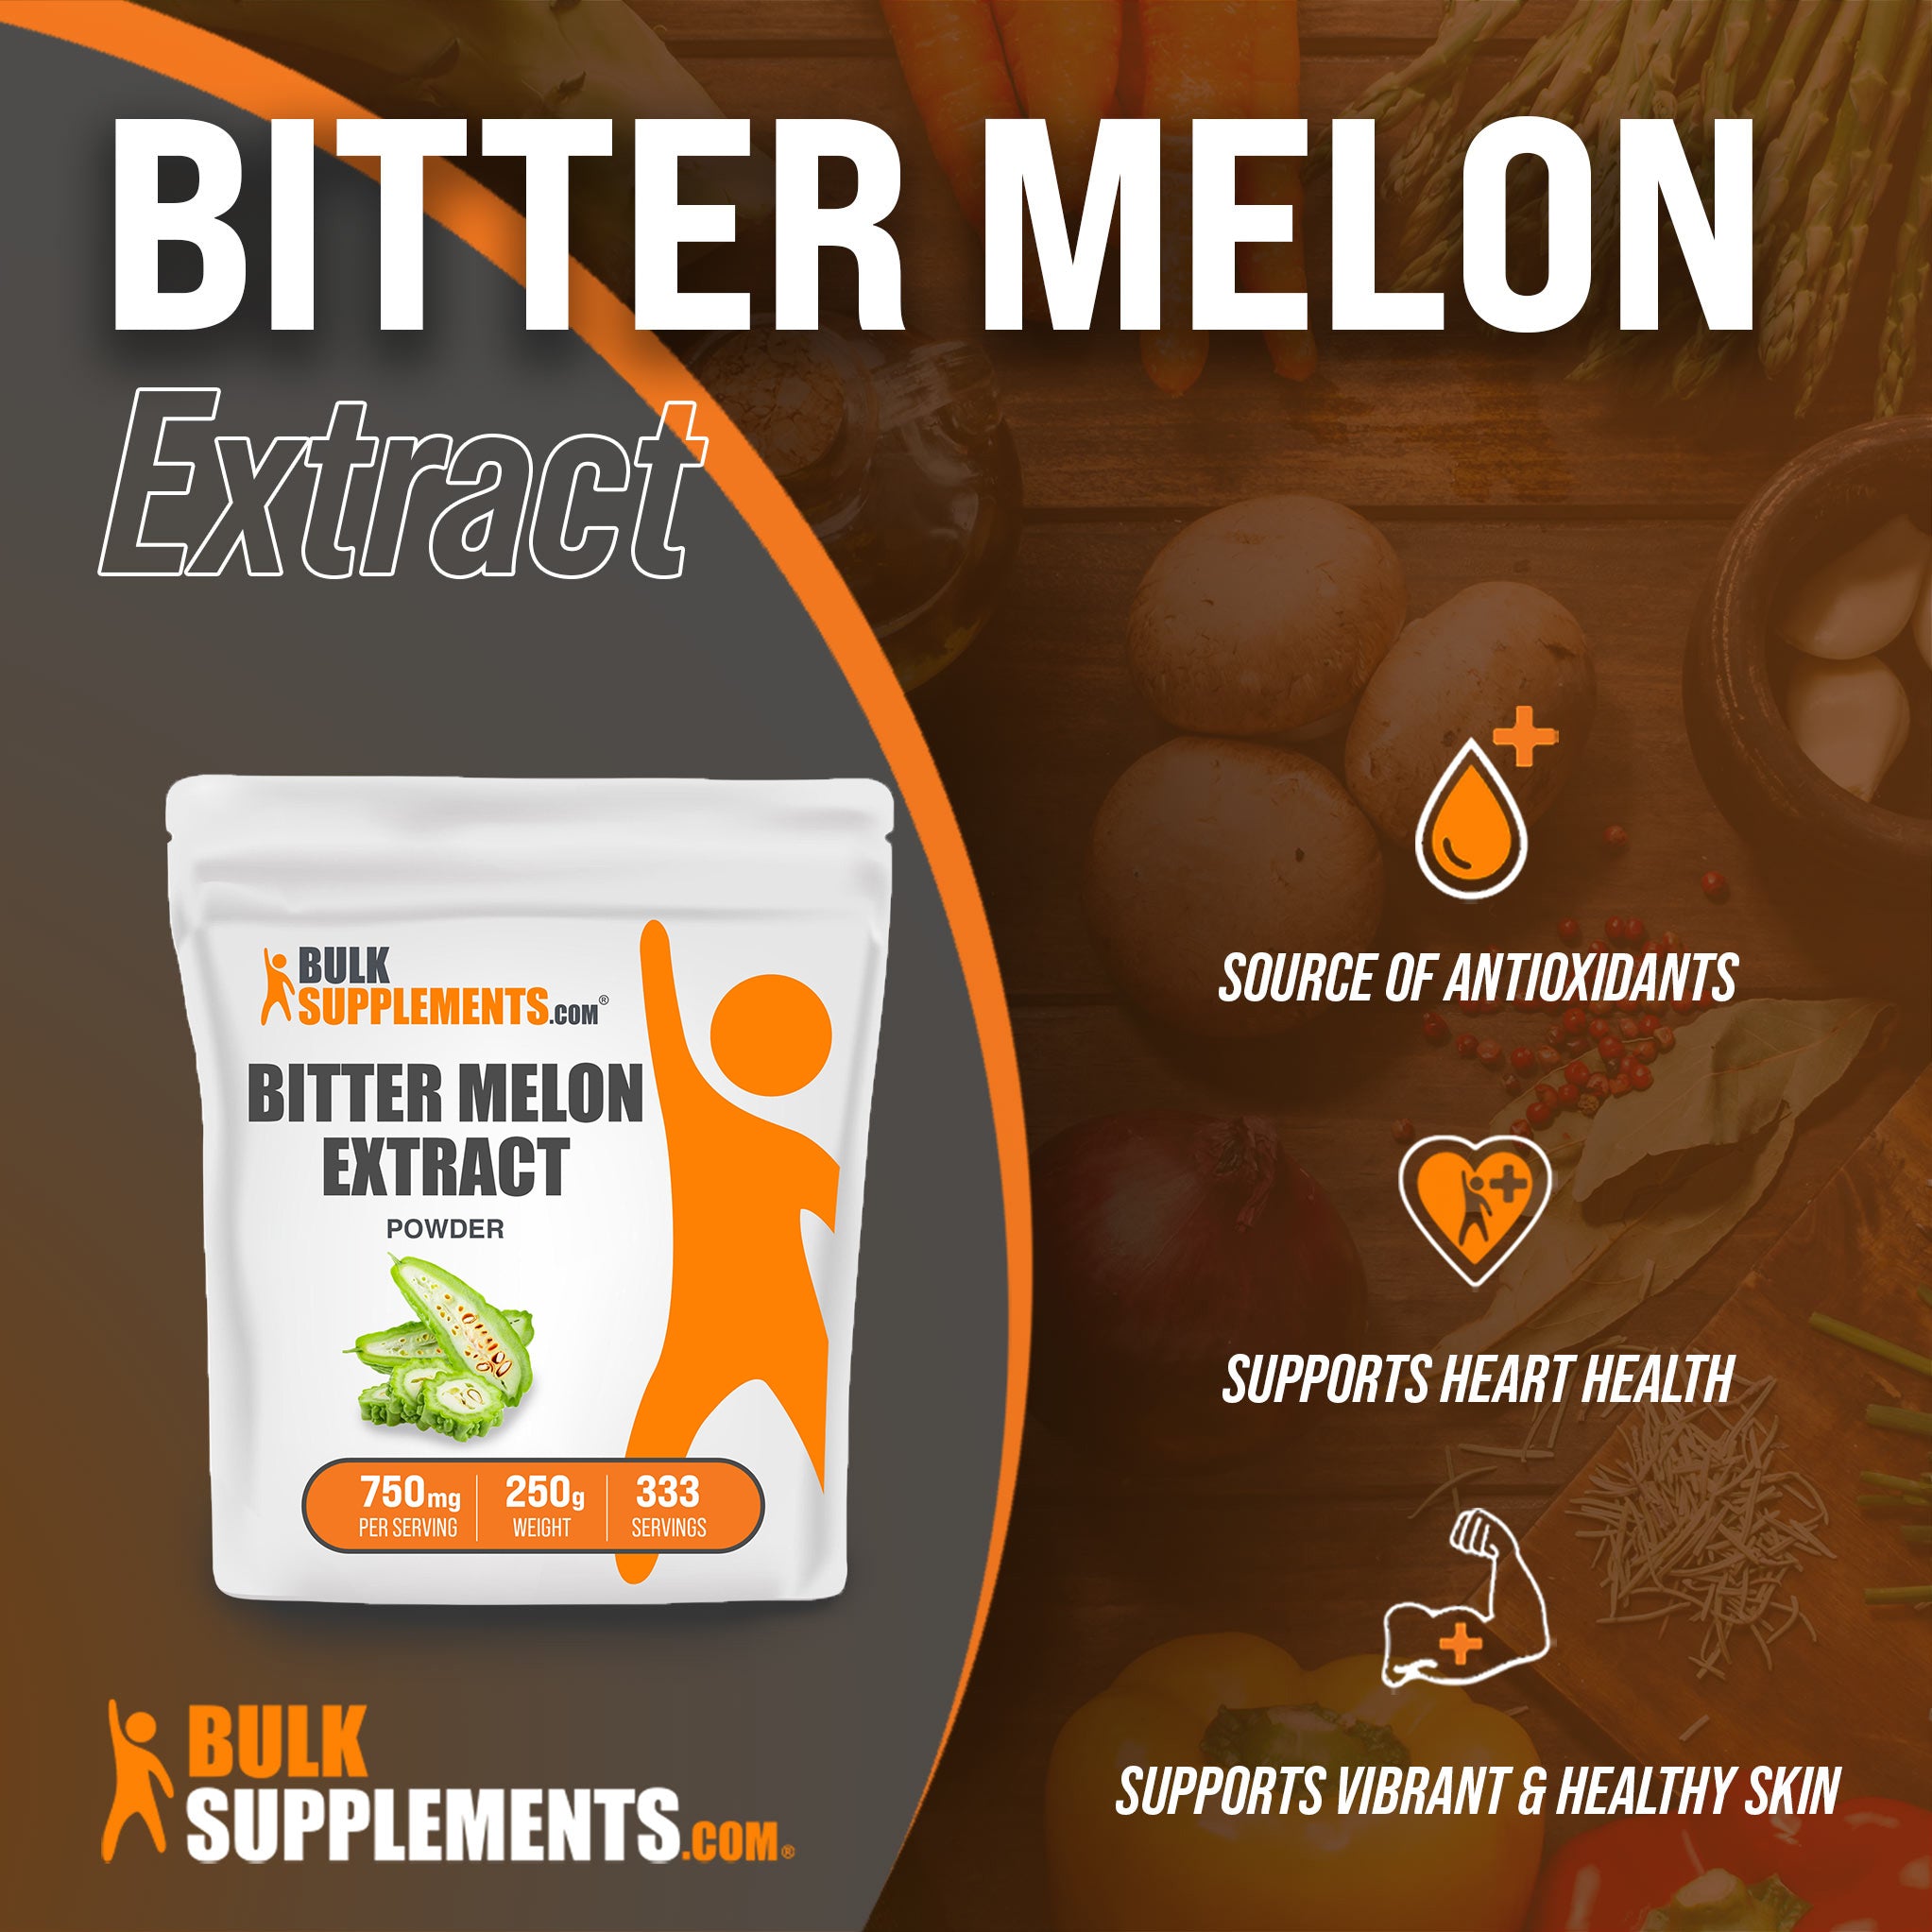 Benefits of Bitter Melon Extract; source of antioxidants, supports heart health, supports vibrant & healthy skin